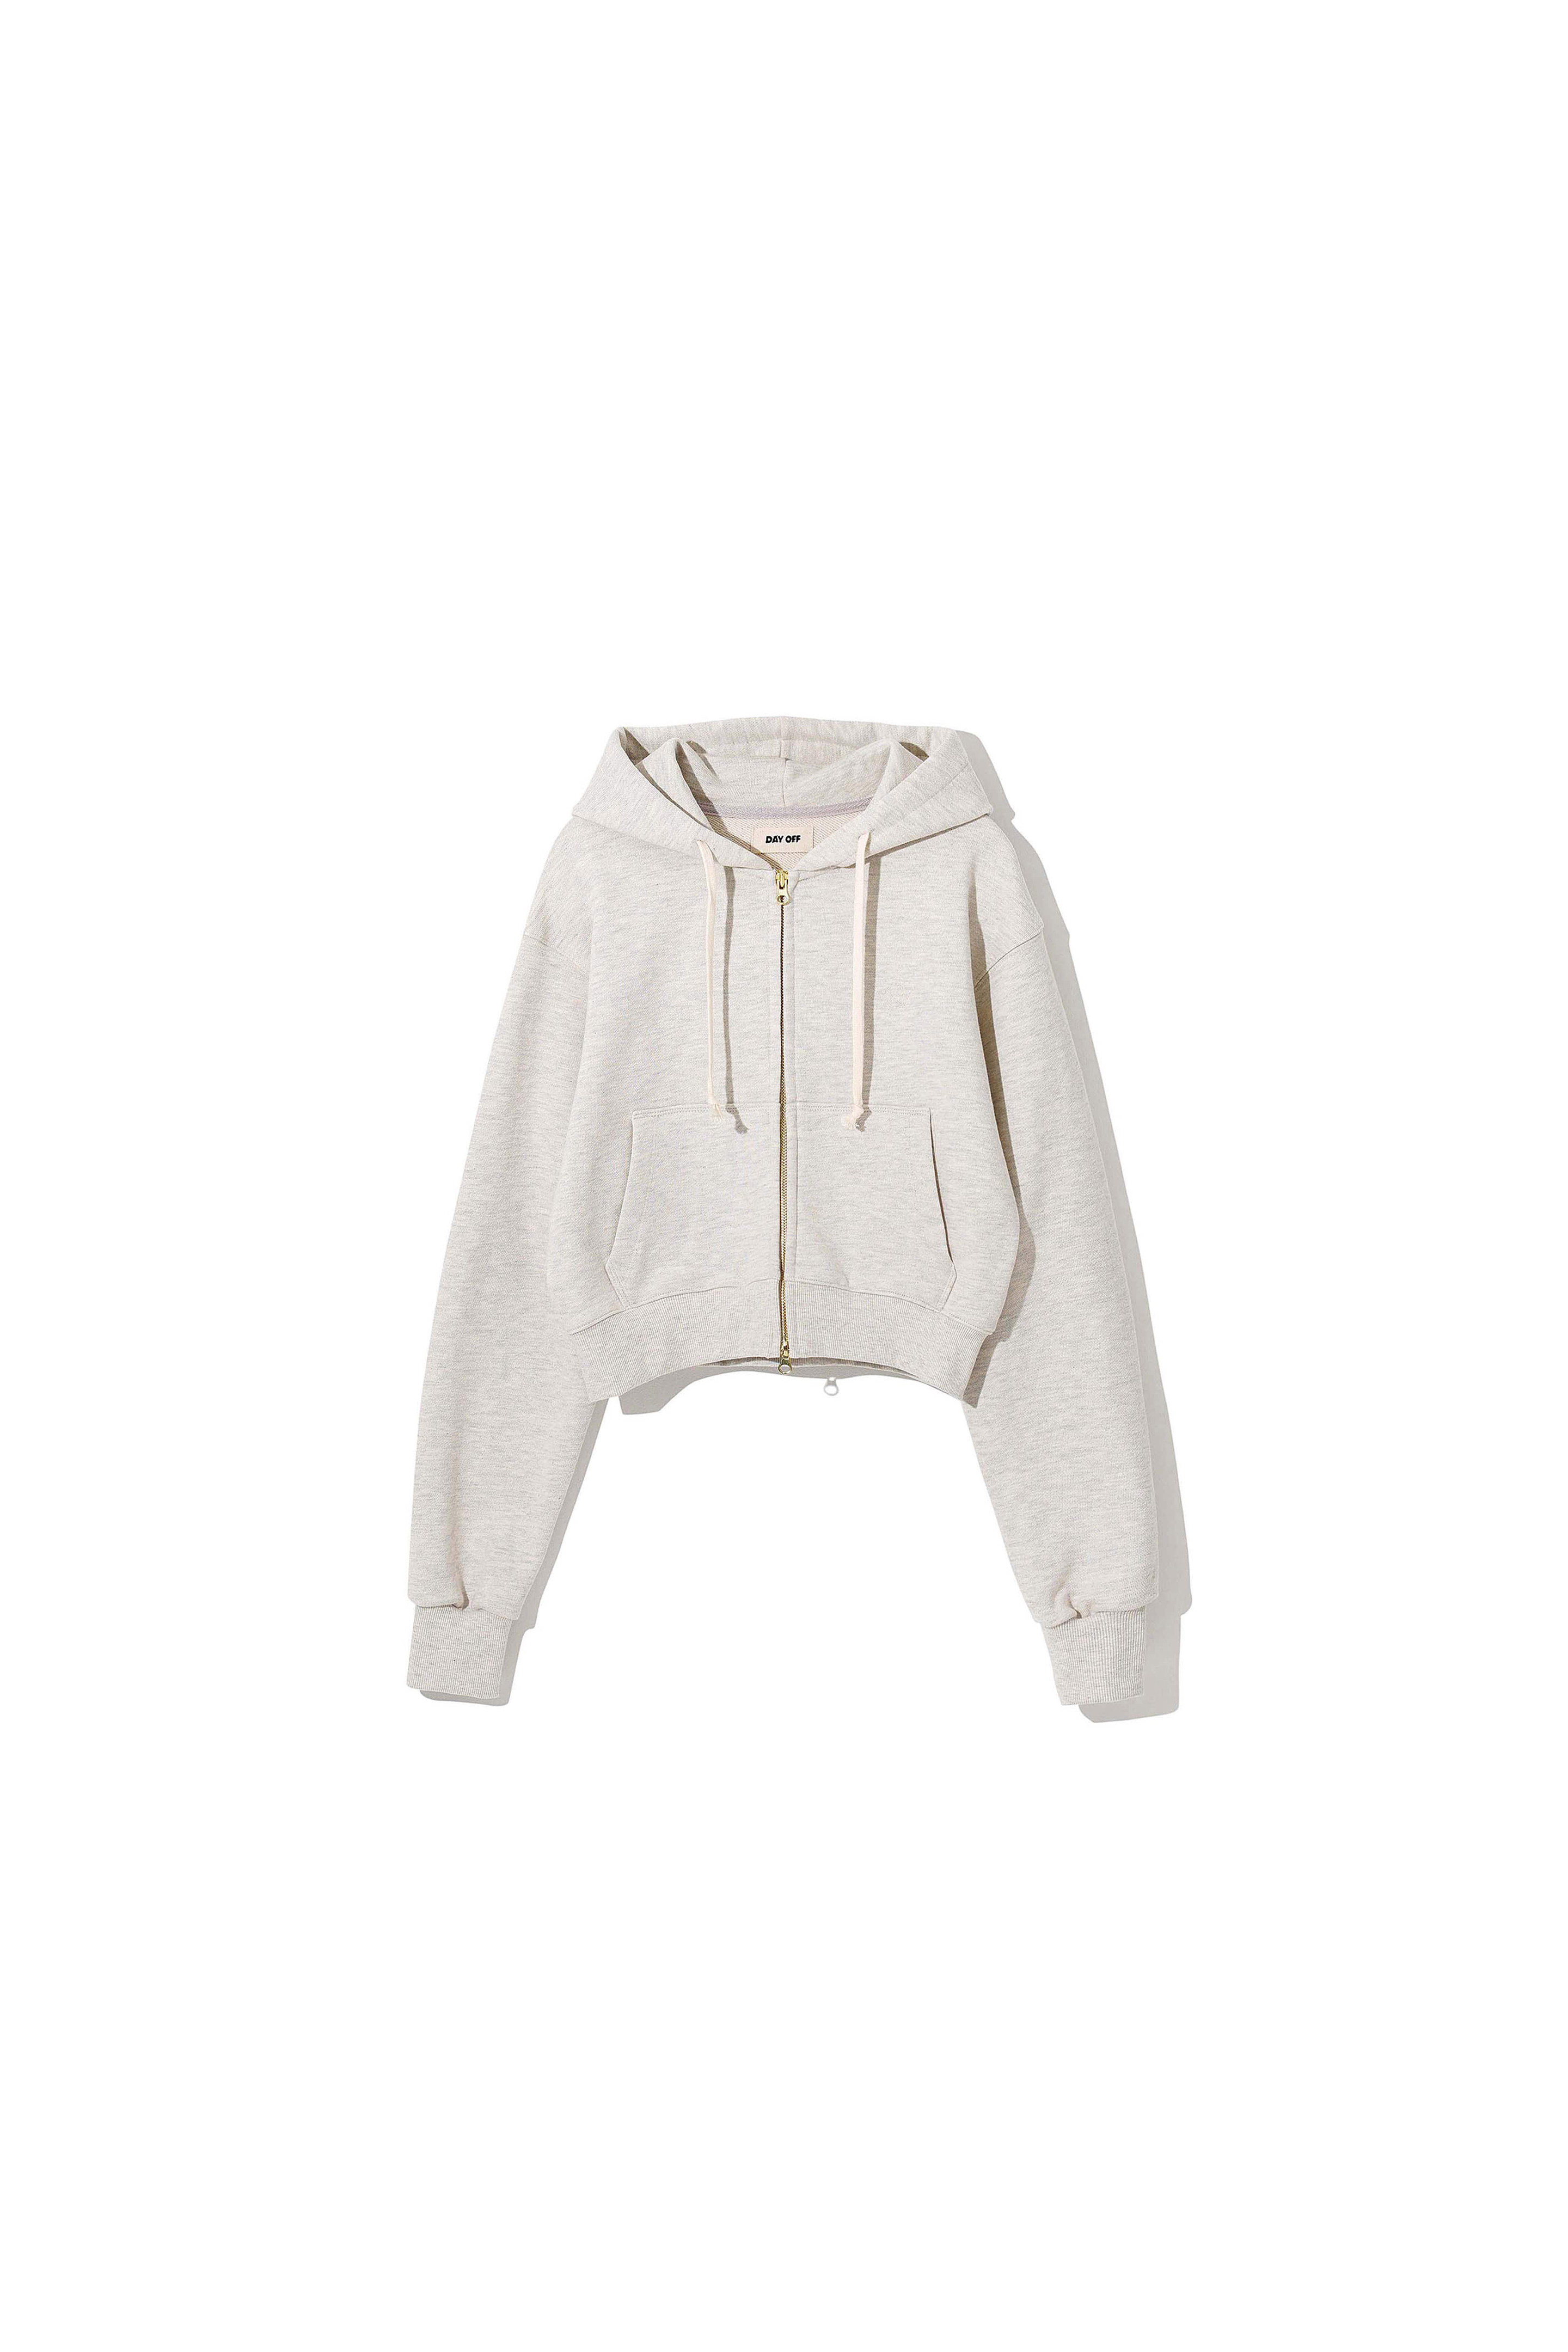 DAY-OFF 005 Cropped Hoodie Jumper Oatmeal